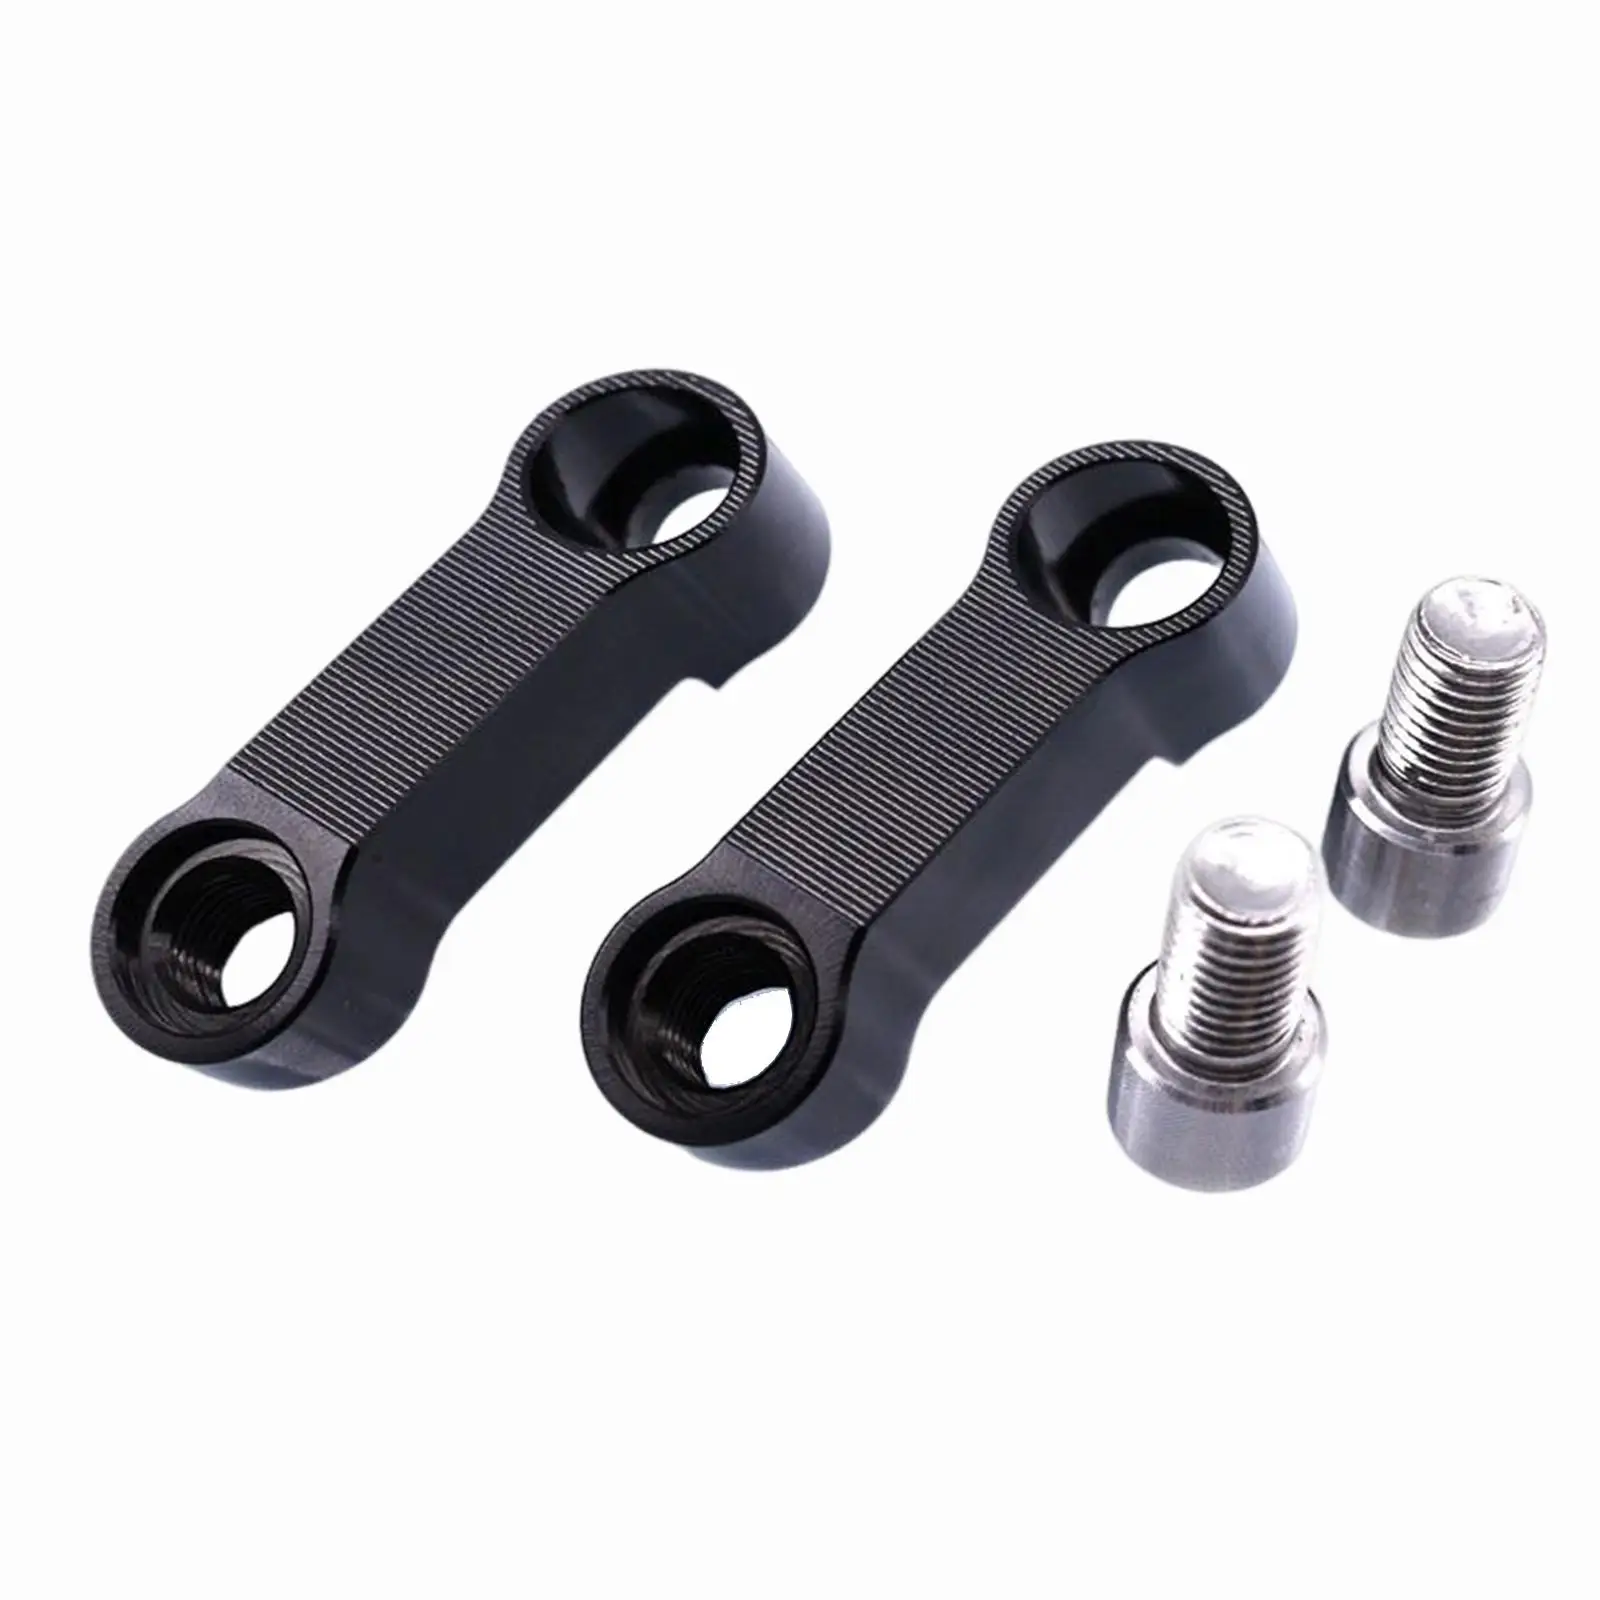 2x Mirror Mount Riser 10mm Accessories High Performance Premium Durable Easy to Install Professional M10 Extender Adapter